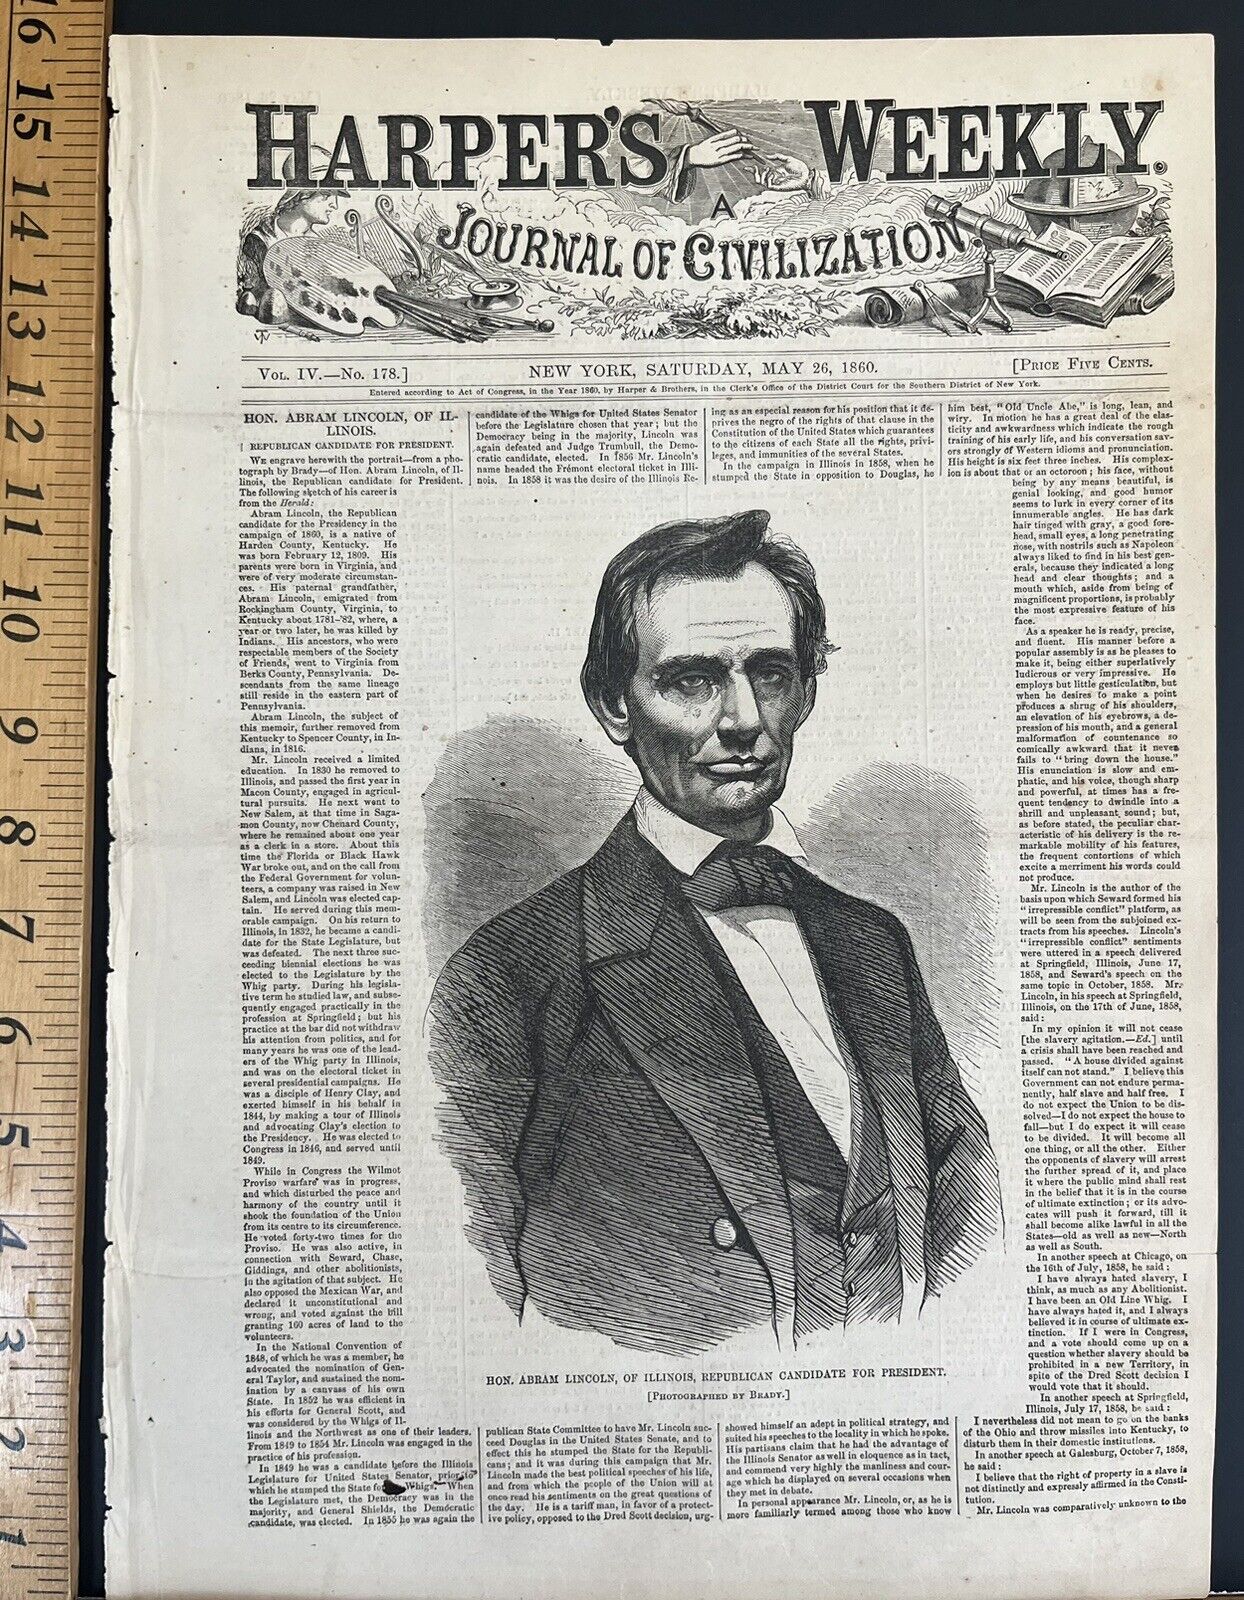 MAY 26 1860 HARPER’S WEEKLY WINSLOW HOMER ENGRAVING OF BRADY ABRAM LINCOLN PHOTO